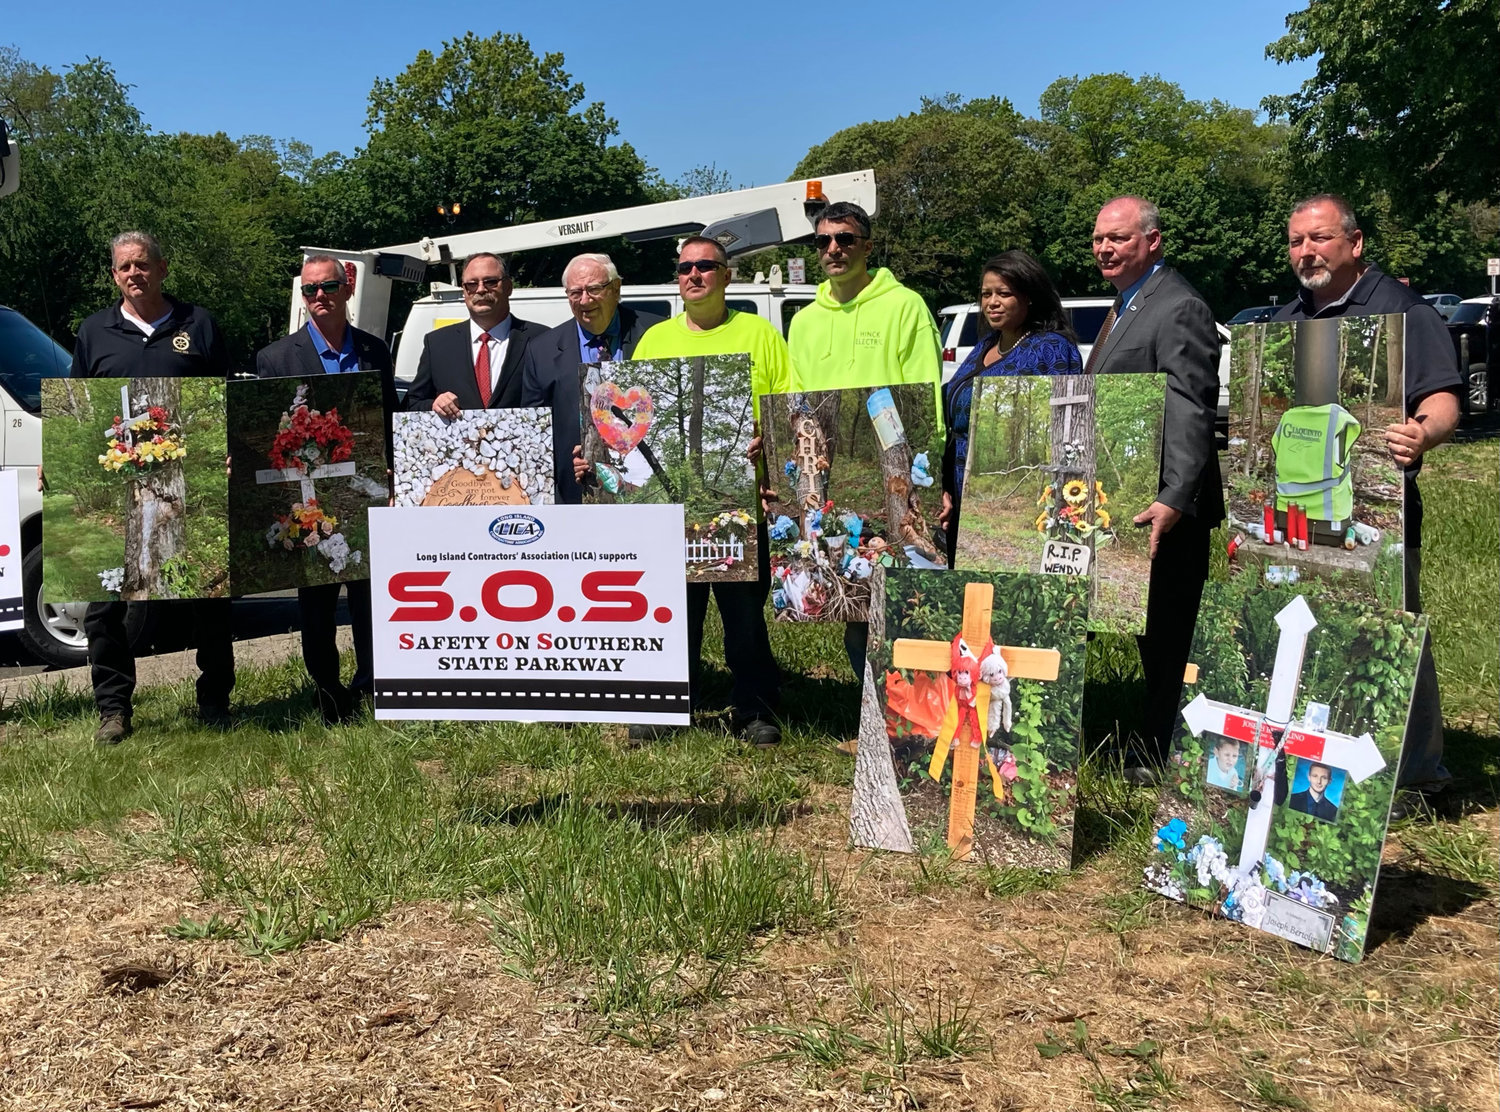 Long Island Contractors Association representatives joined Assemblywoman Michaelle Solages and other officials as part of a demonstration last year remembering those killed in accidents on the Southern State Parkway.